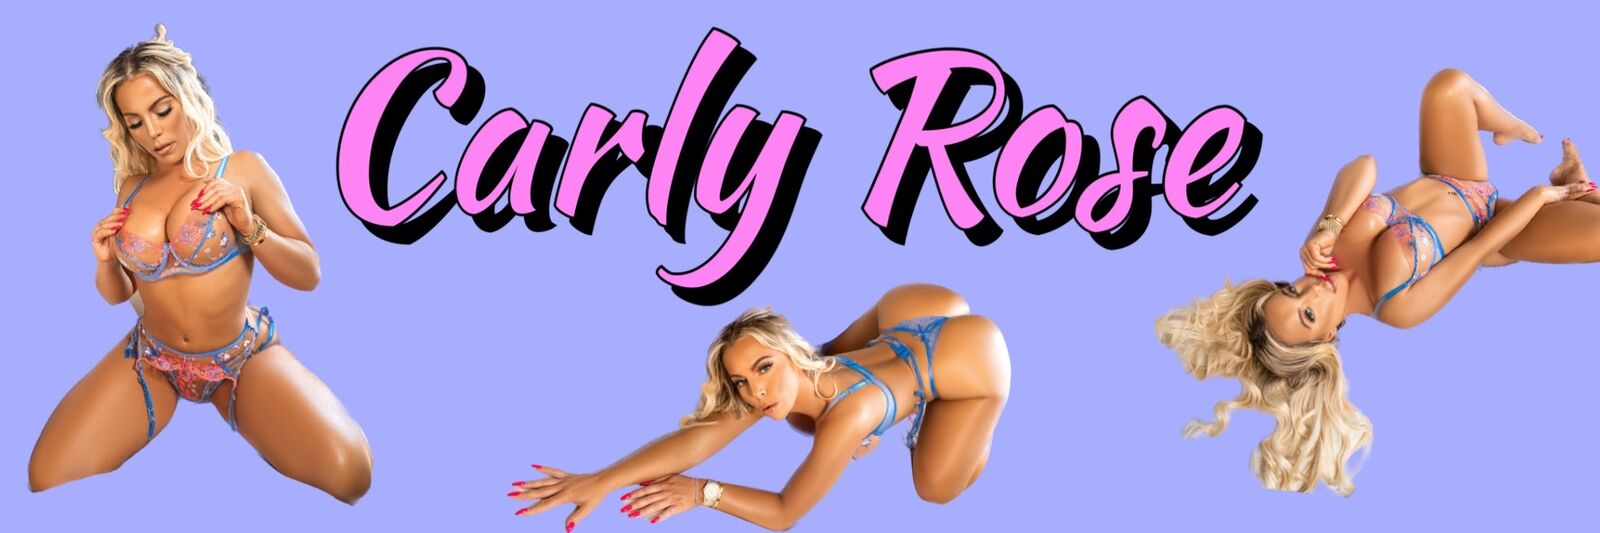 See Carly Rose 💦 profile